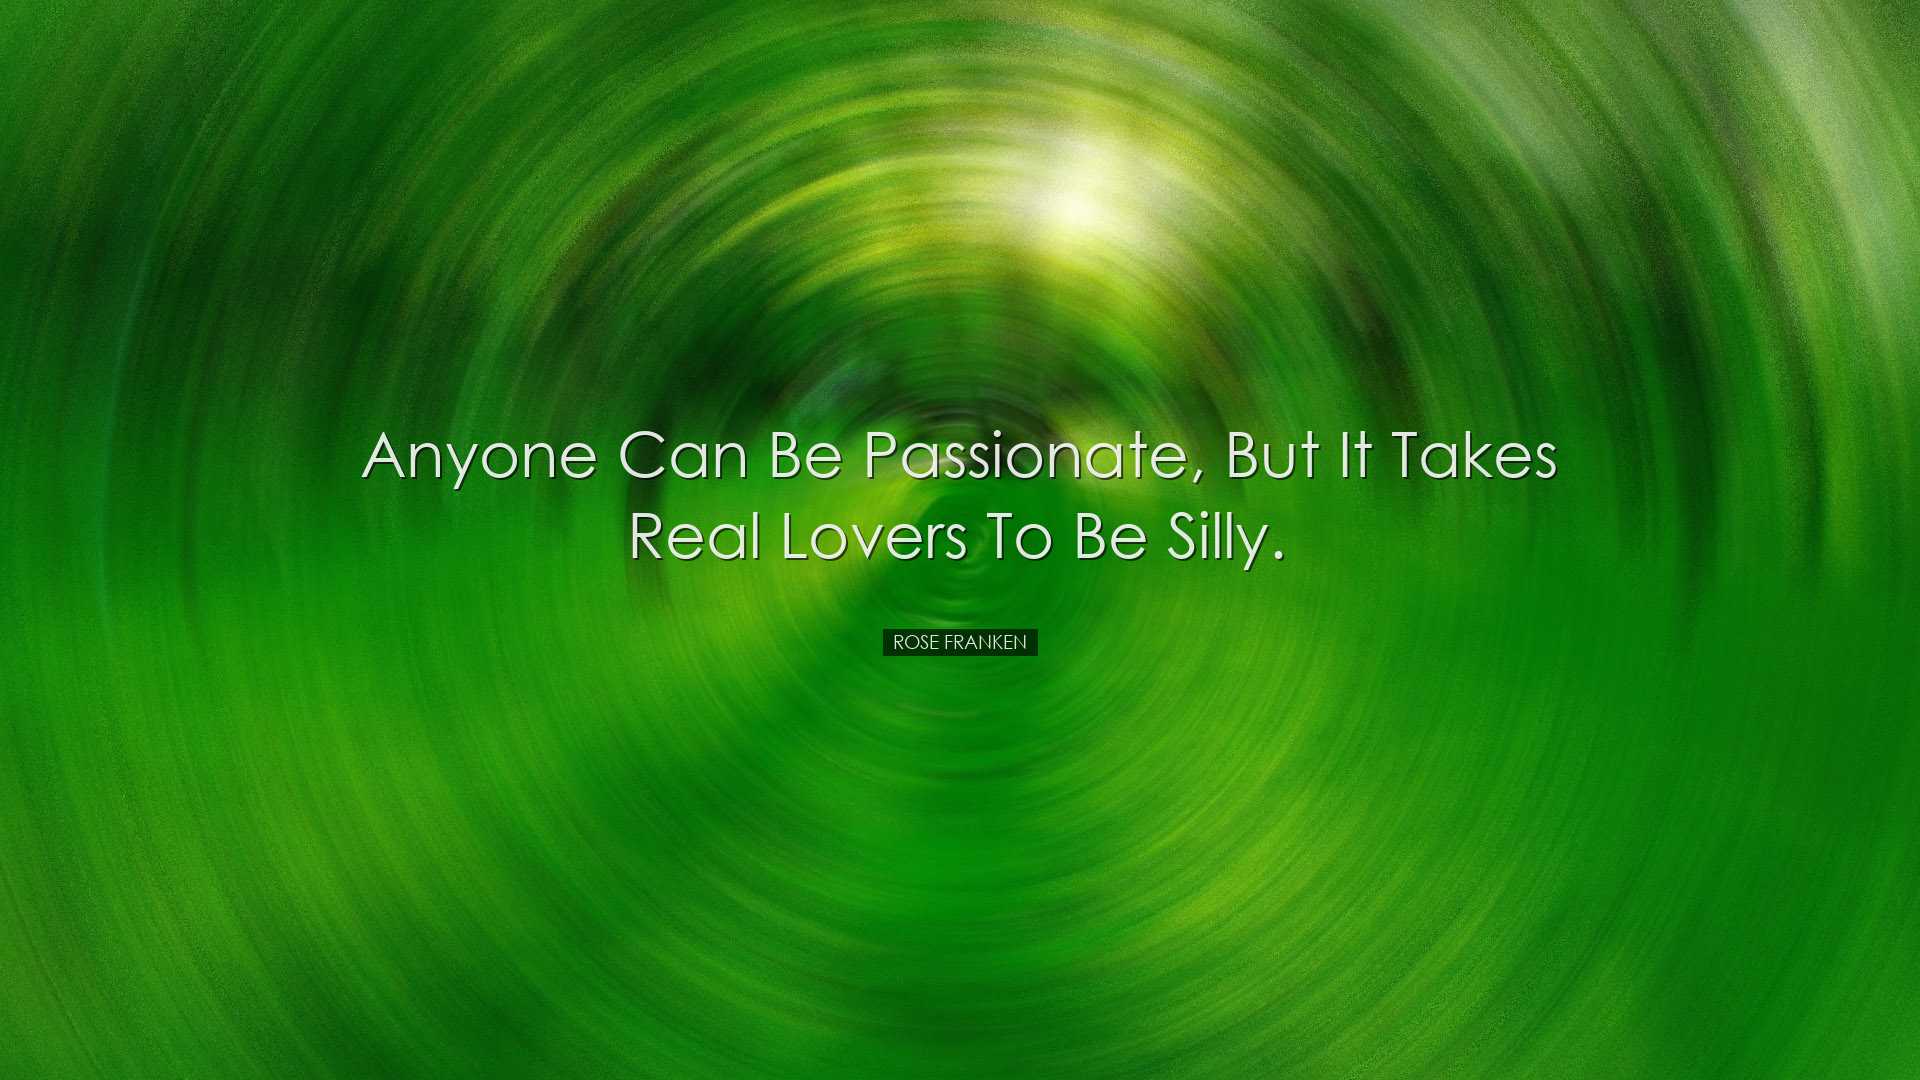 Anyone can be passionate, but it takes real lovers to be silly. -